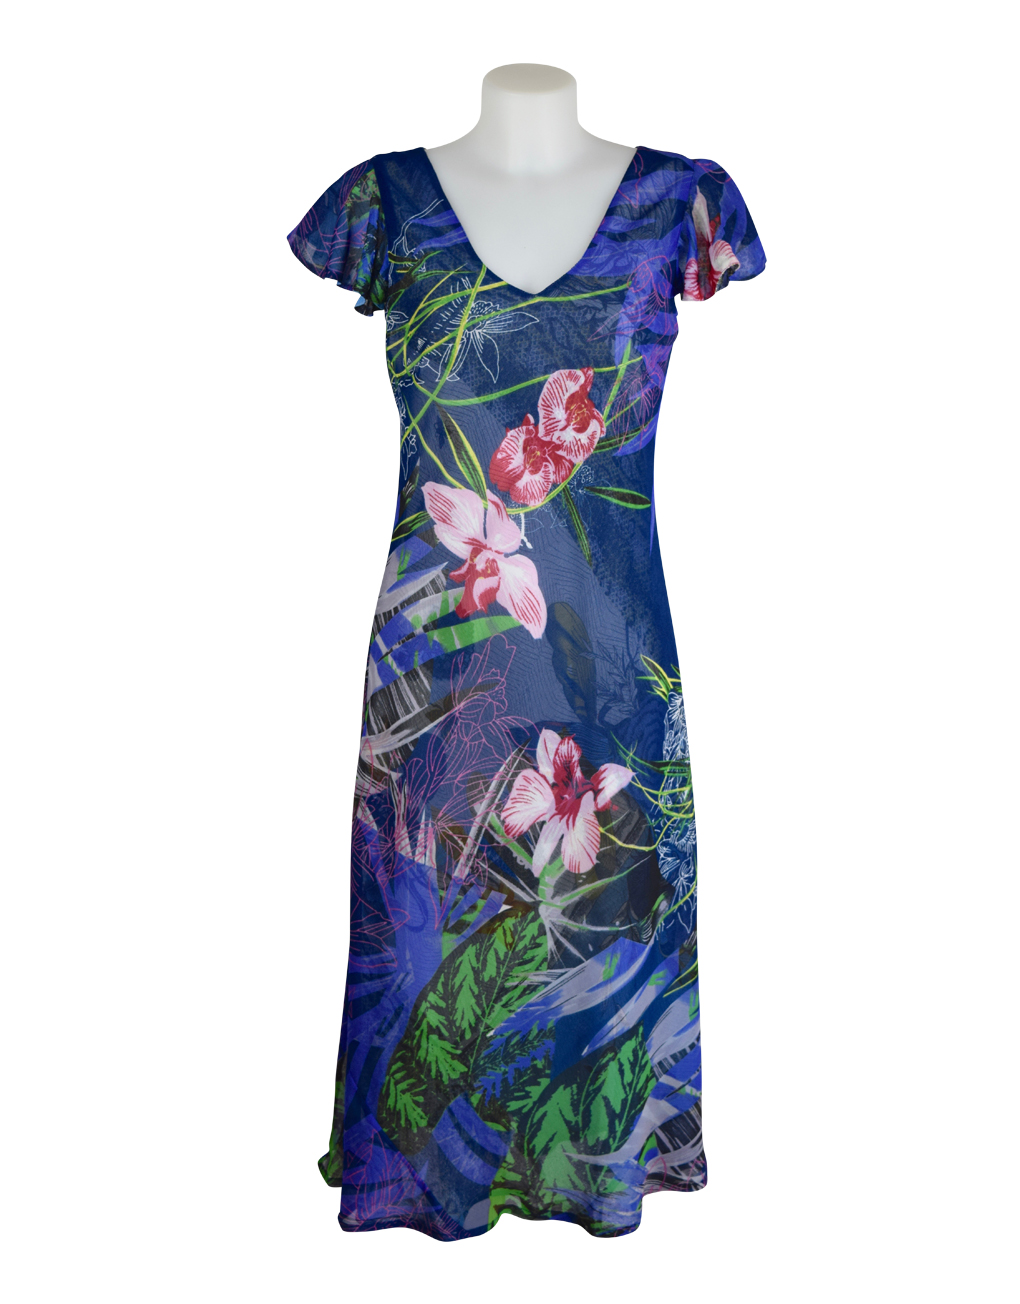 Paramour Reversible Dress Cap Sleeve Blue With Pink Flower1